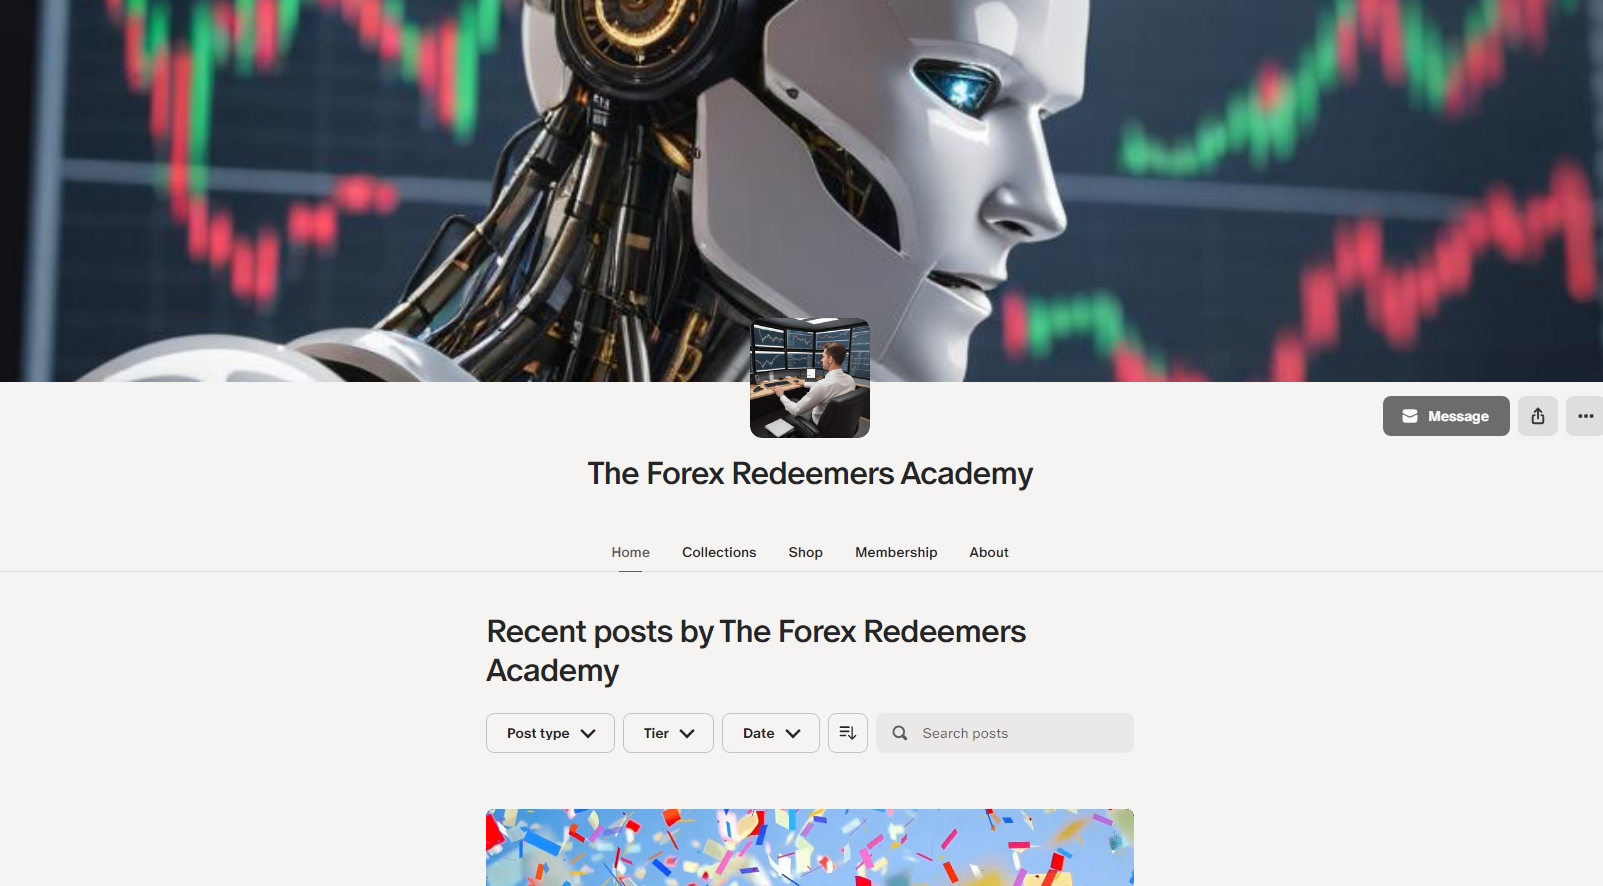 Image of the Official Patreon page of the Forex Redeemers Academy